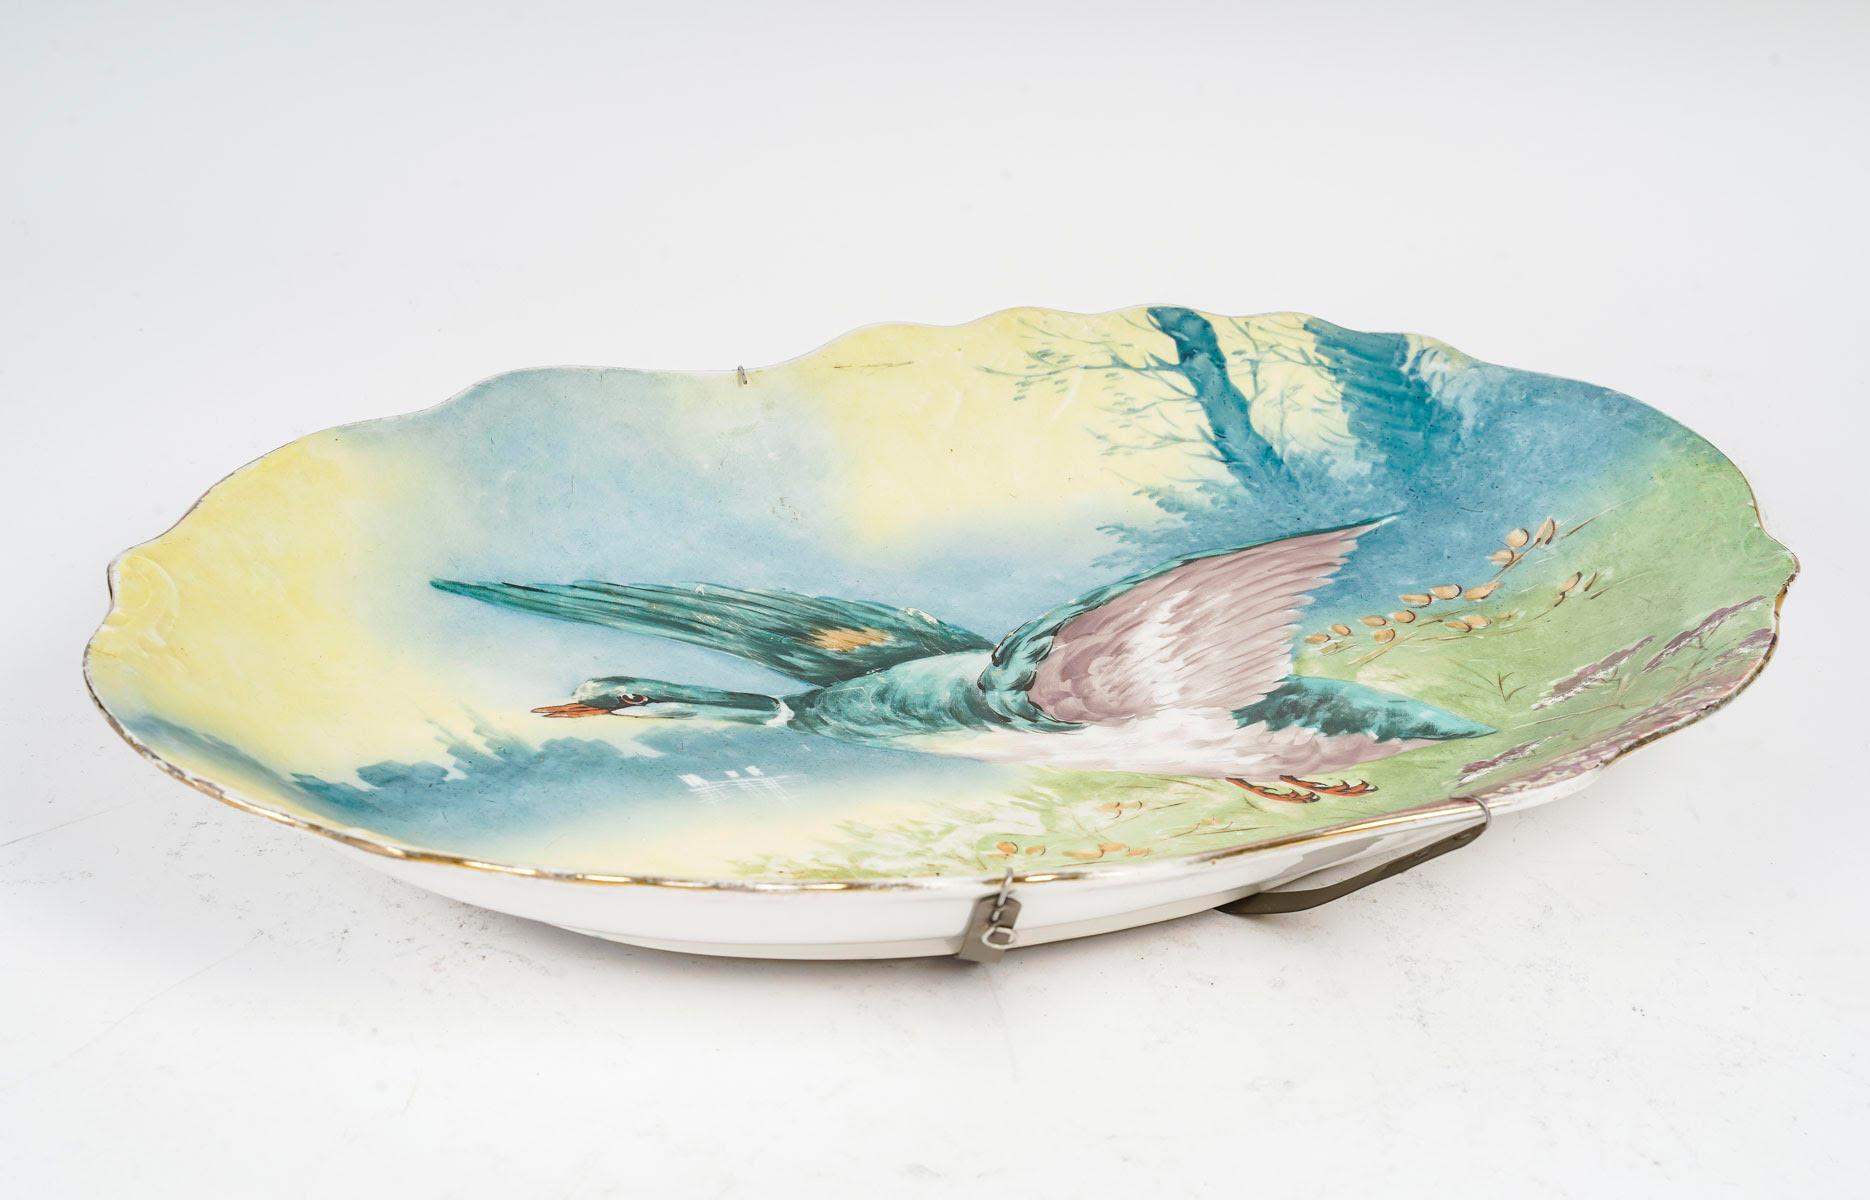 Large Decorative Porcelain Dish, Hand-Painted, 19th Century, Napoleon III Period For Sale 1